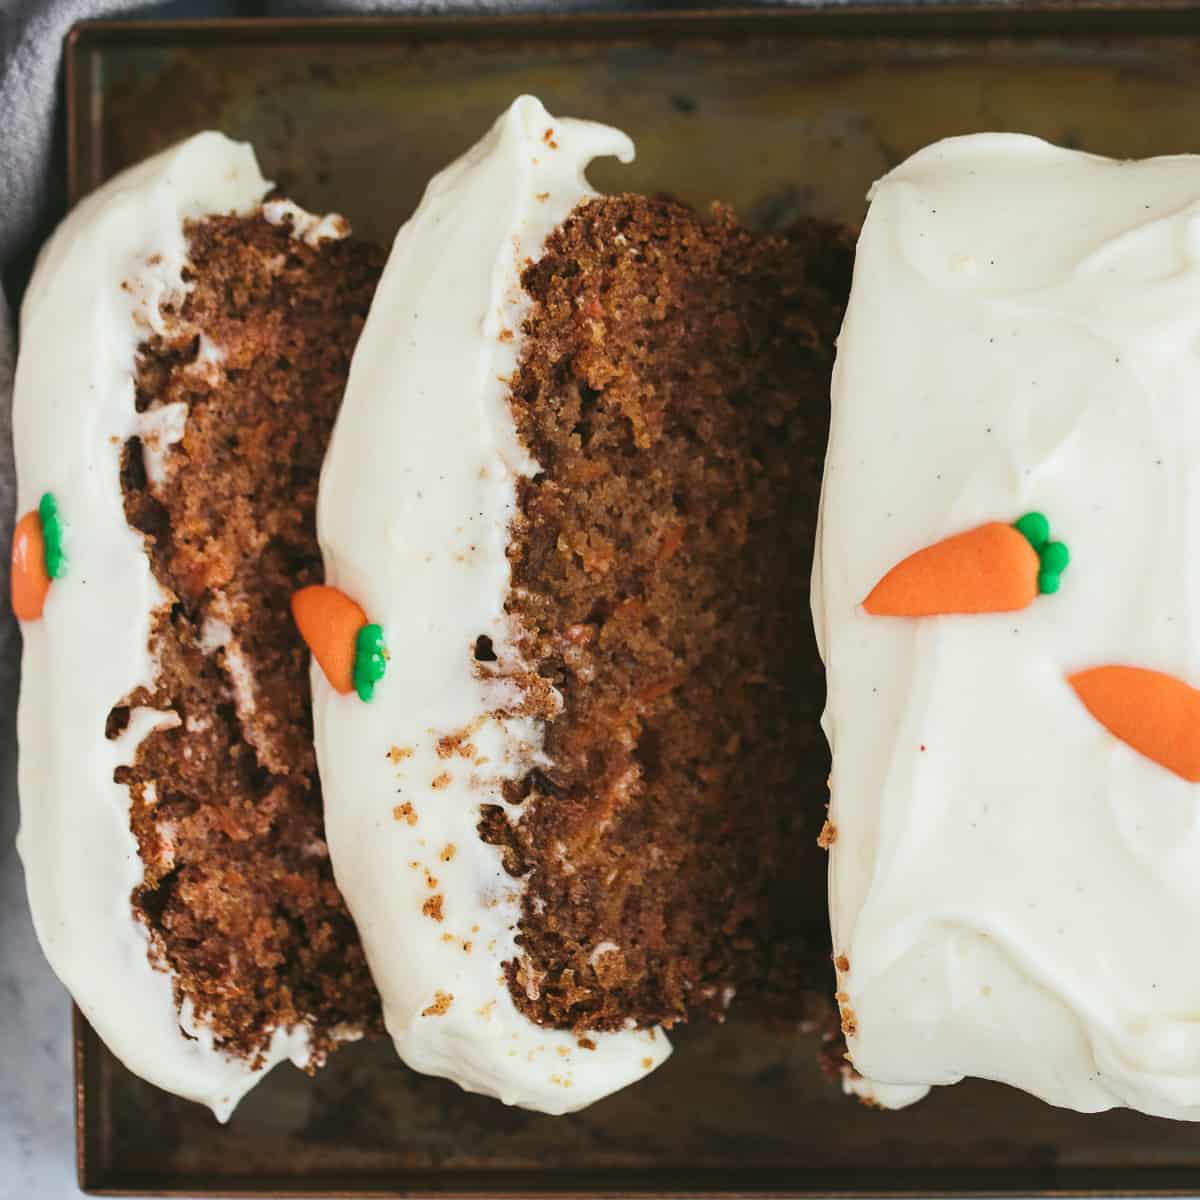 A carrot cake loaf that has been sliced.